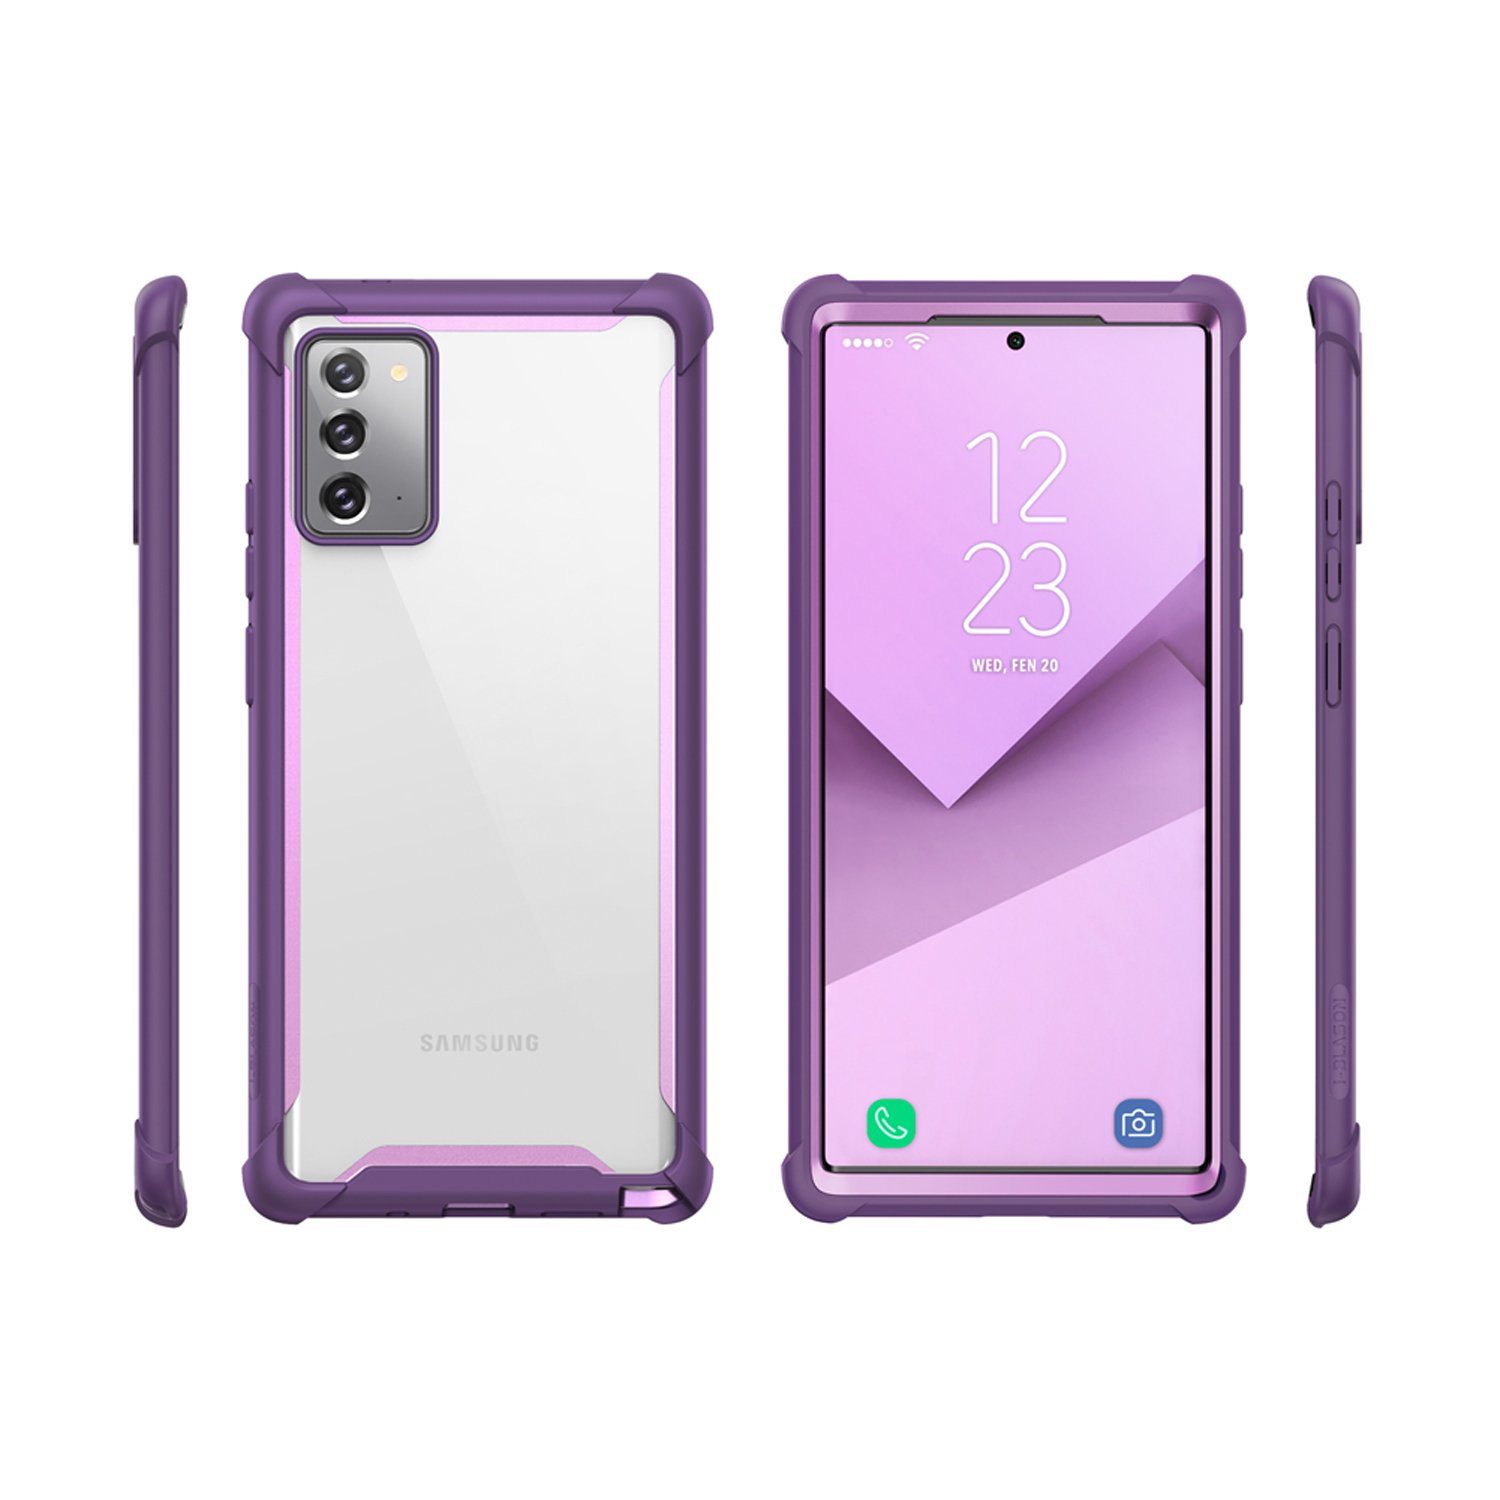 i-Blason Ares Series Clear Case for Samsung Galaxy Note 20(Without Screen Protector), Purple Default i-Blason 